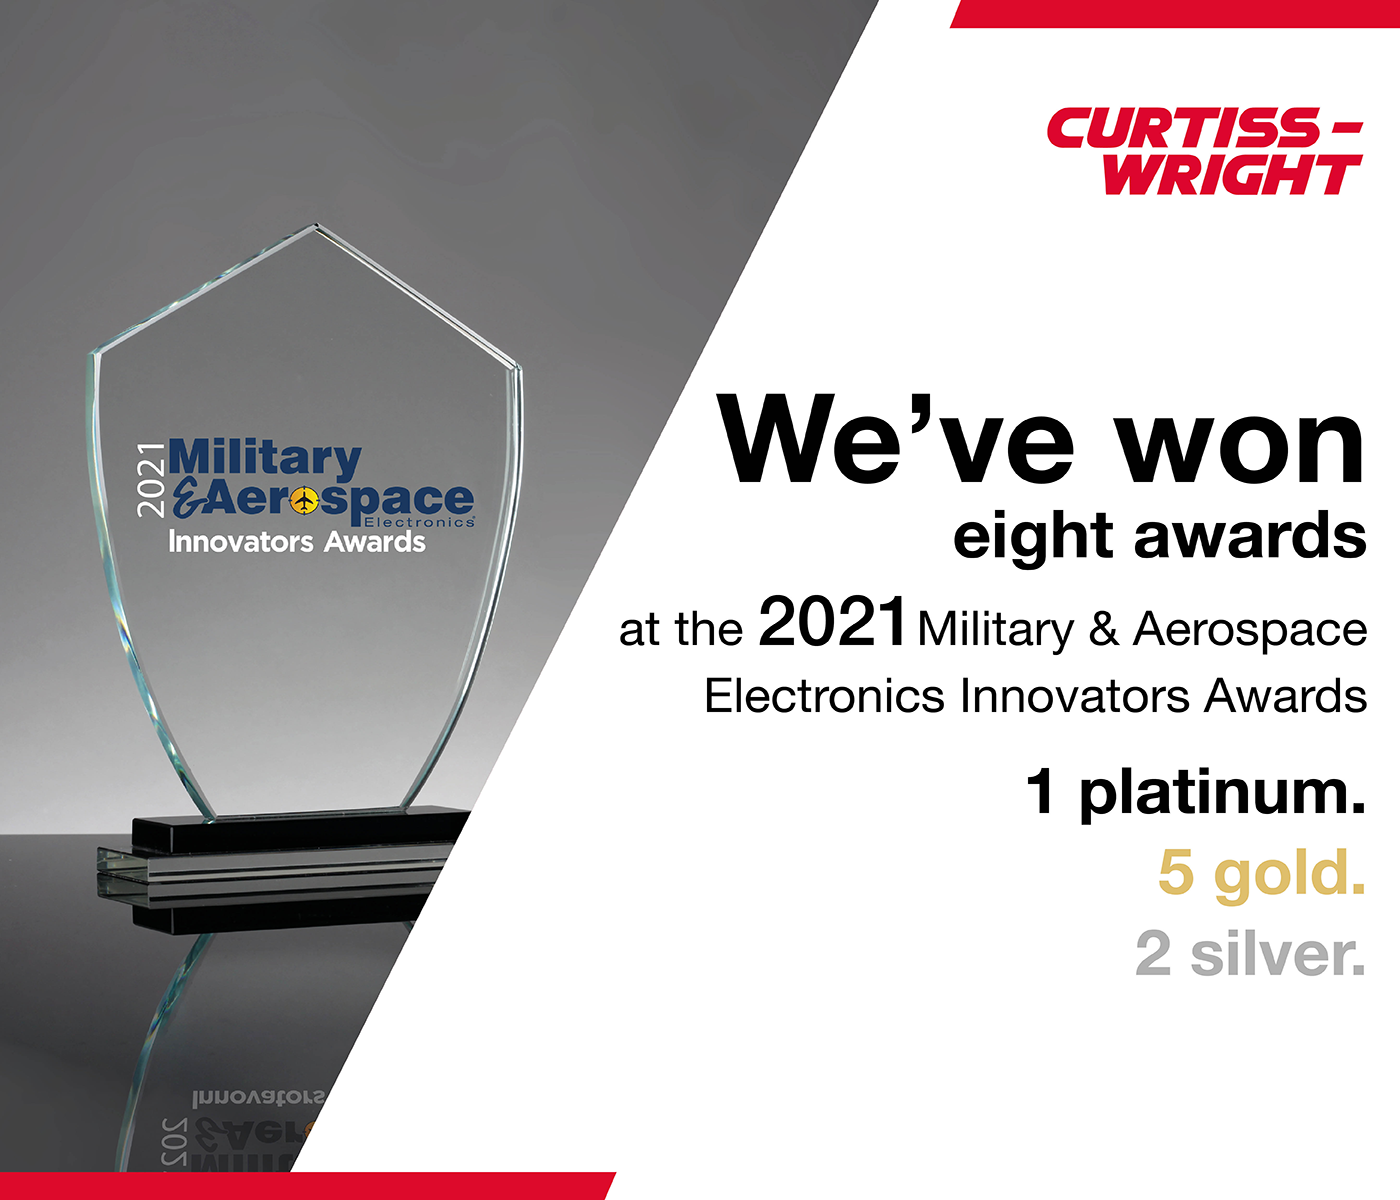 Curtiss-Wright honored by Military & Aerospace Electronics Innovators Awards 2021